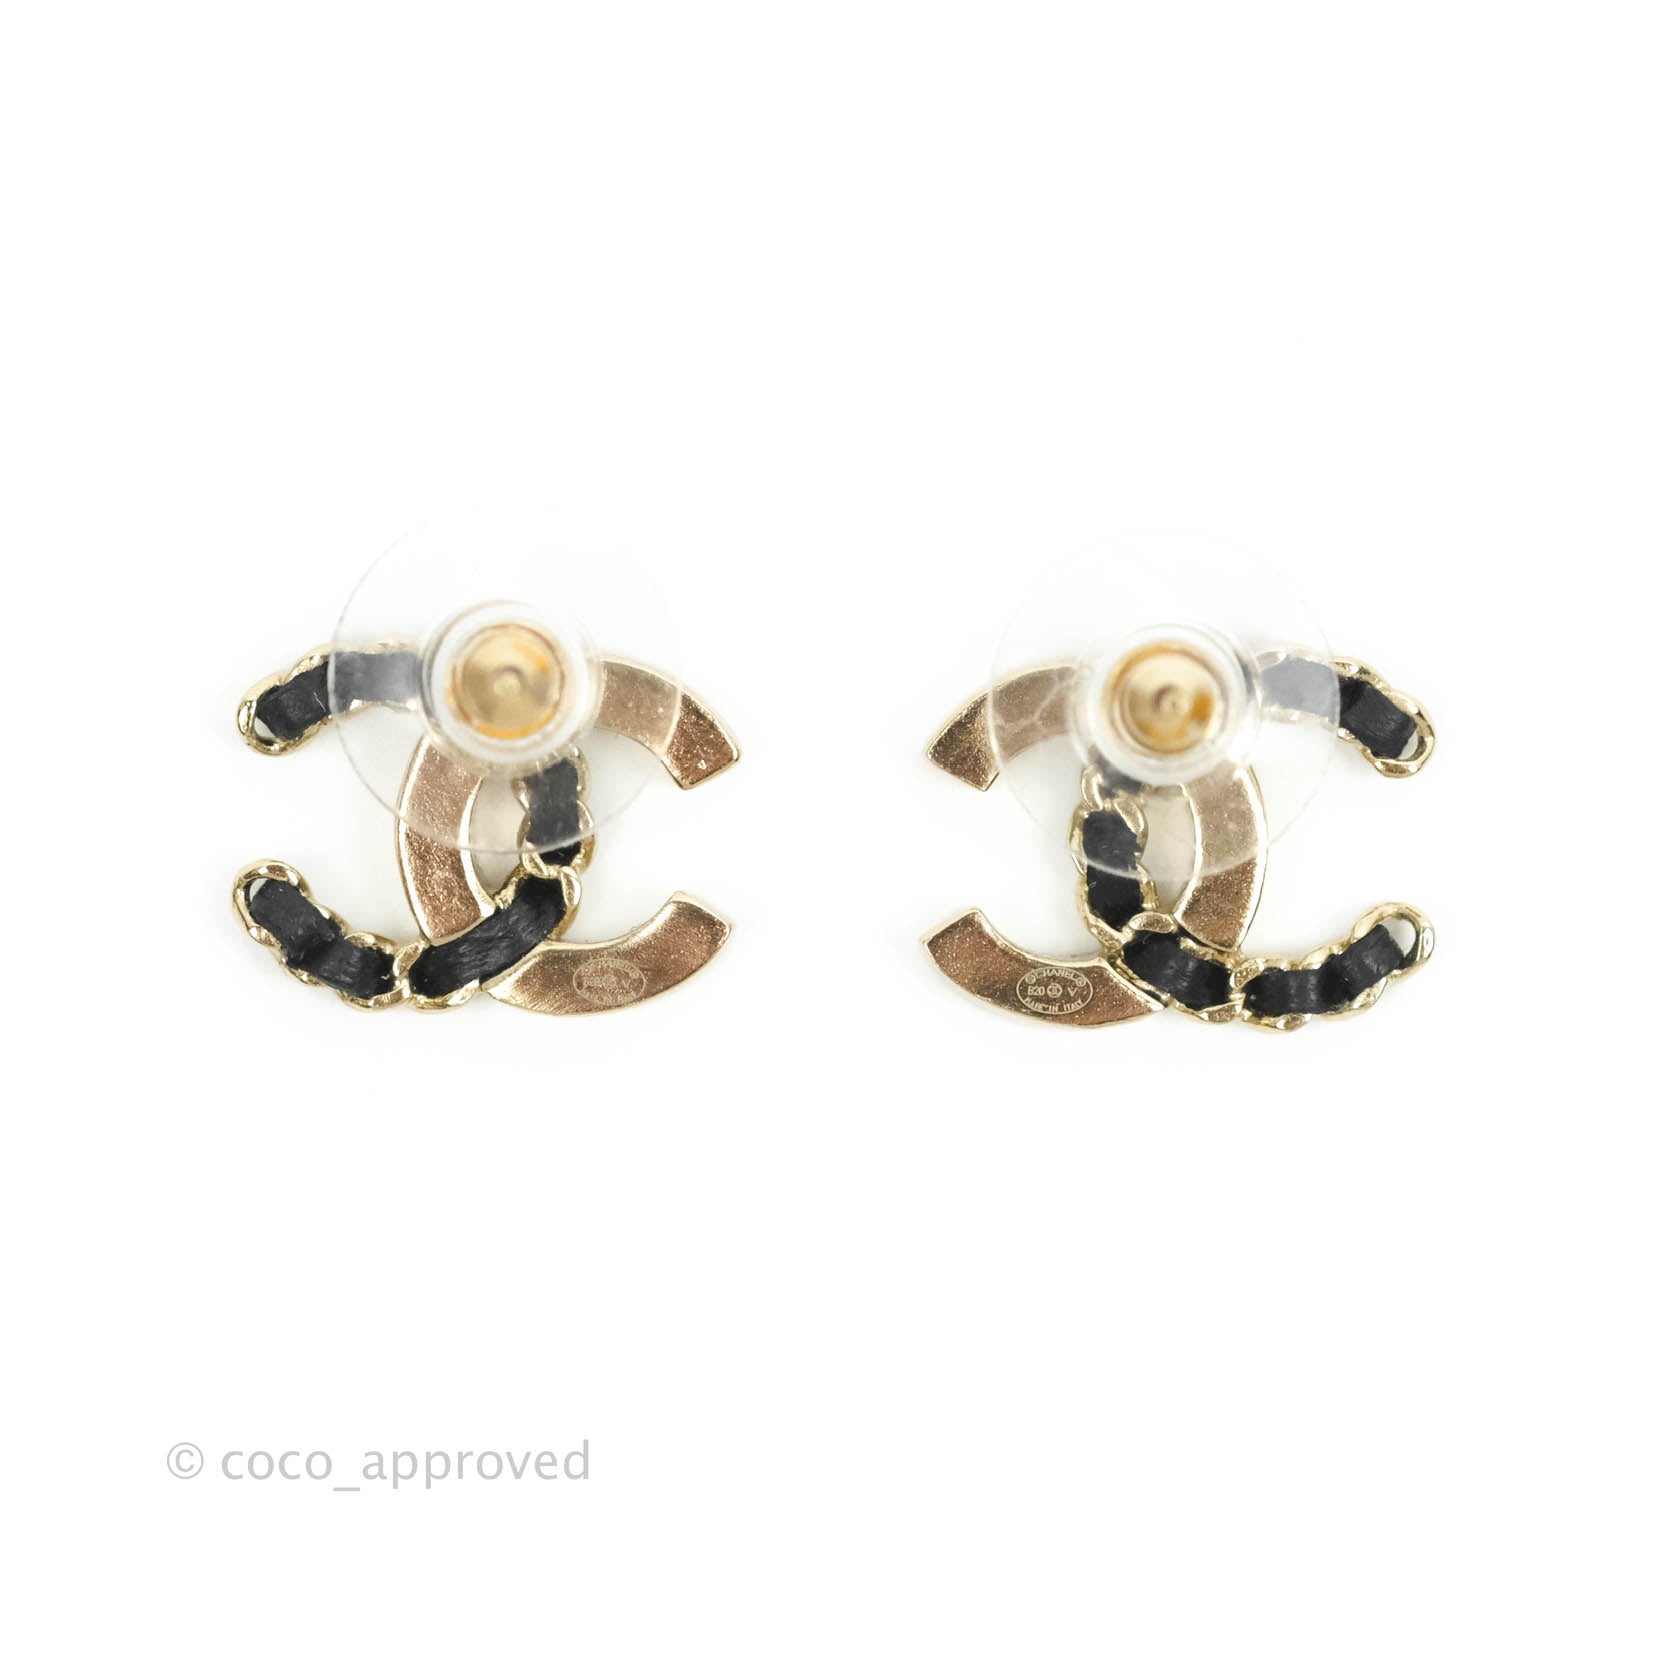 Chanel Crystal CC Braided Black Leather Earrings Light Gold Tone